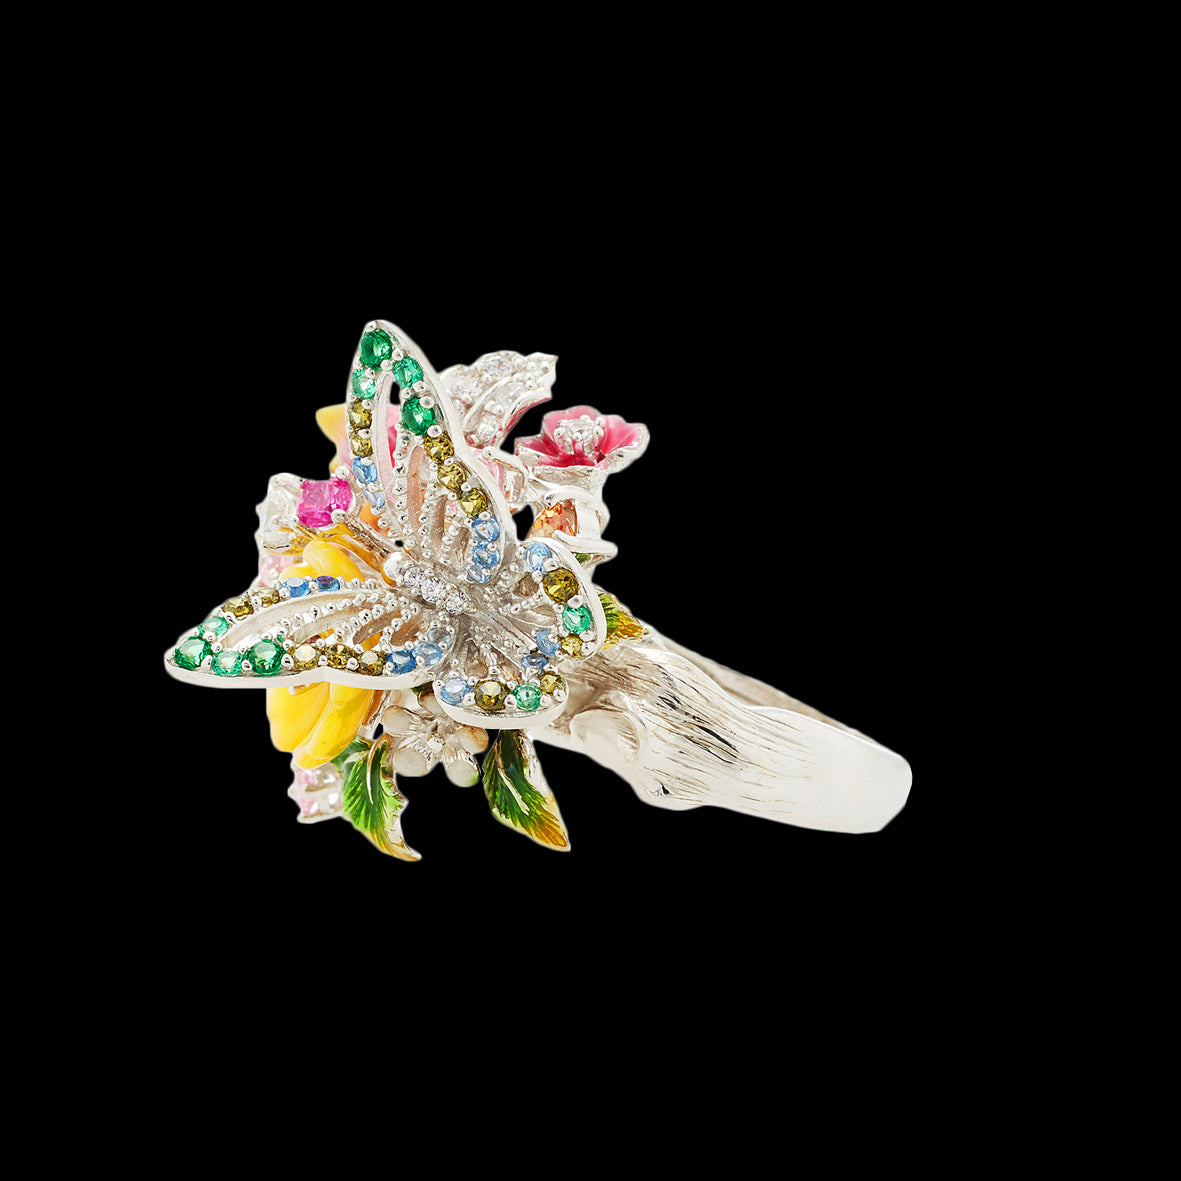 White Butterfly Bouquet Ring, Ring, Anabela Chan Joaillerie - Fine jewelry with laboratory grown and created gemstones hand-crafted in the United Kingdom. Anabela Chan Joaillerie is the first fine jewellery brand in the world to champion laboratory-grown and created gemstones with high jewellery design, artisanal craftsmanship and a focus on ethical and sustainable innovations.